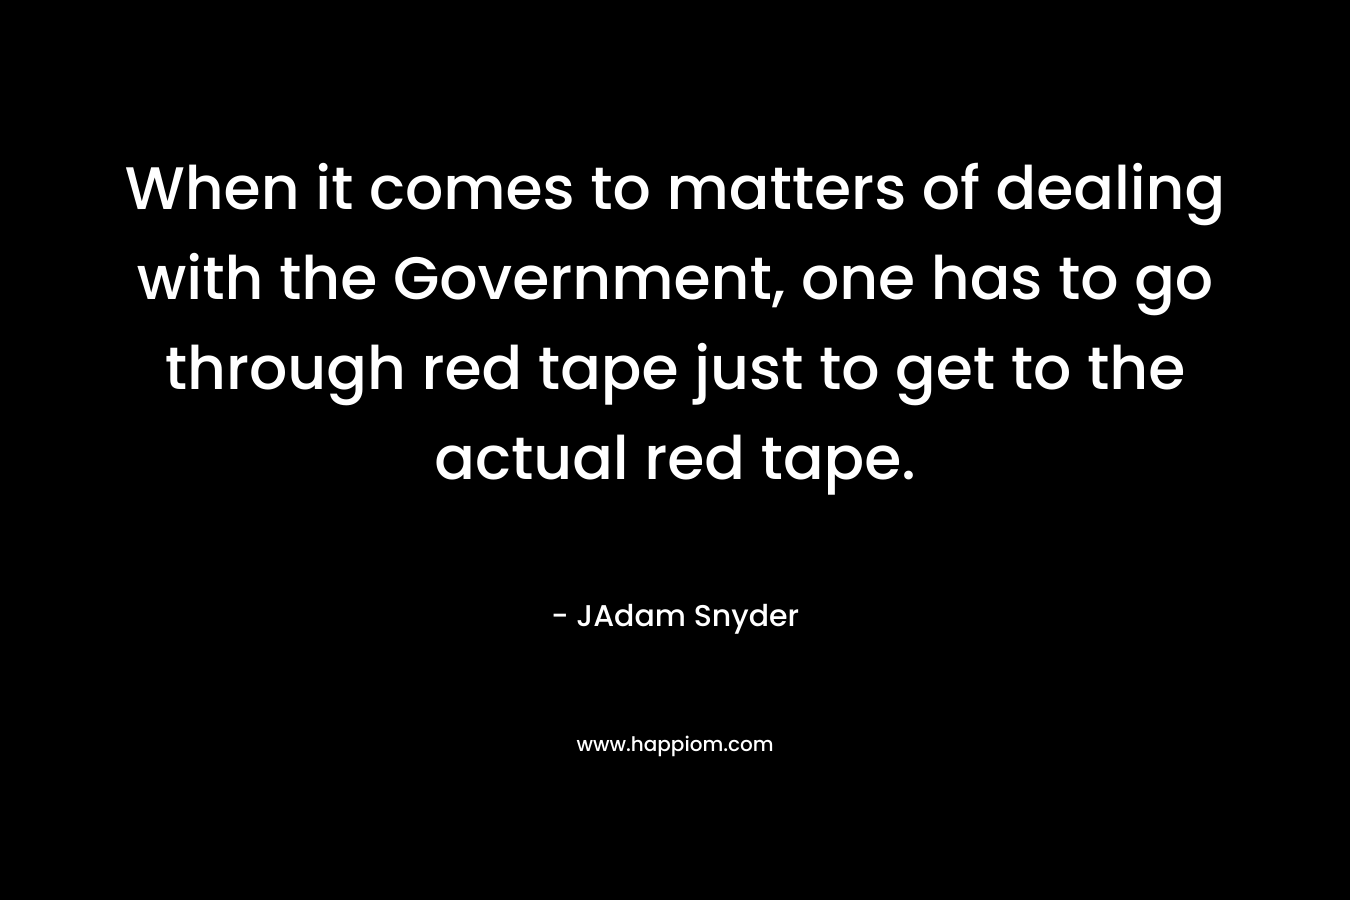 When it comes to matters of dealing with the Government, one has to go through red tape just to get to the actual red tape.